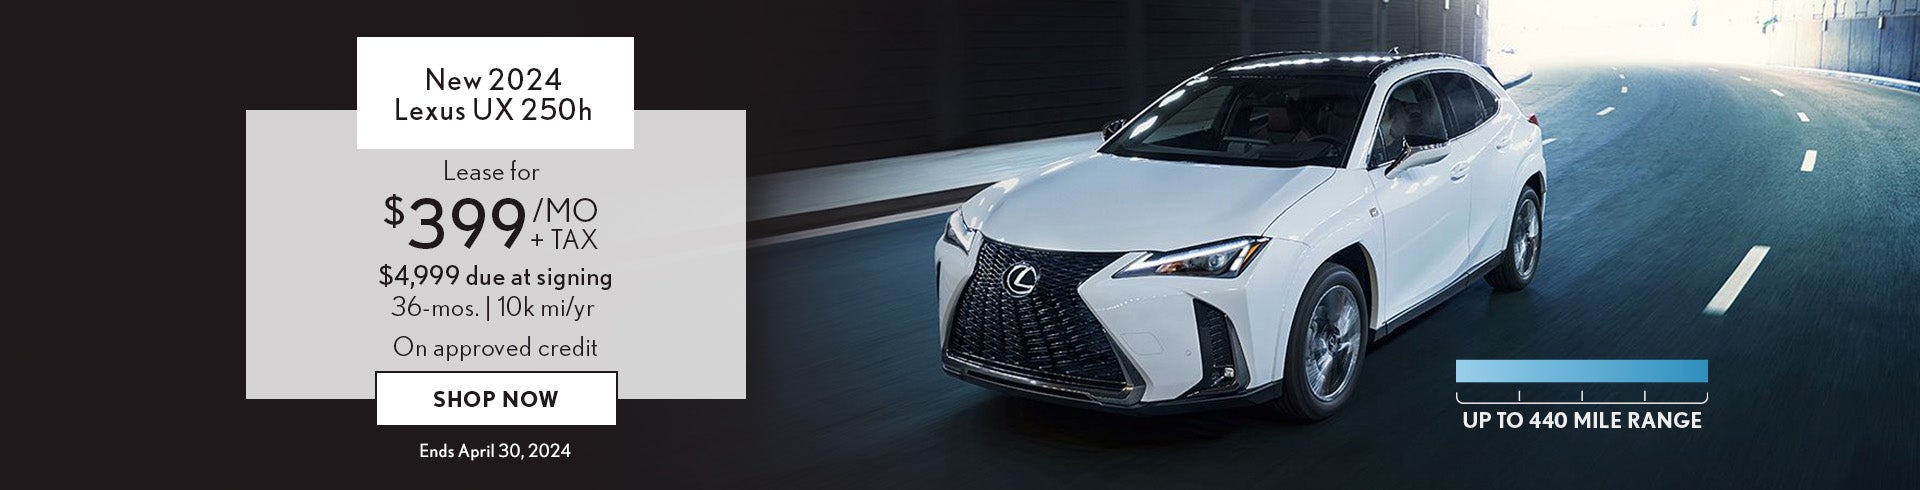 Lease a new 2024 Lexus UX 250h for $399/mo + tax